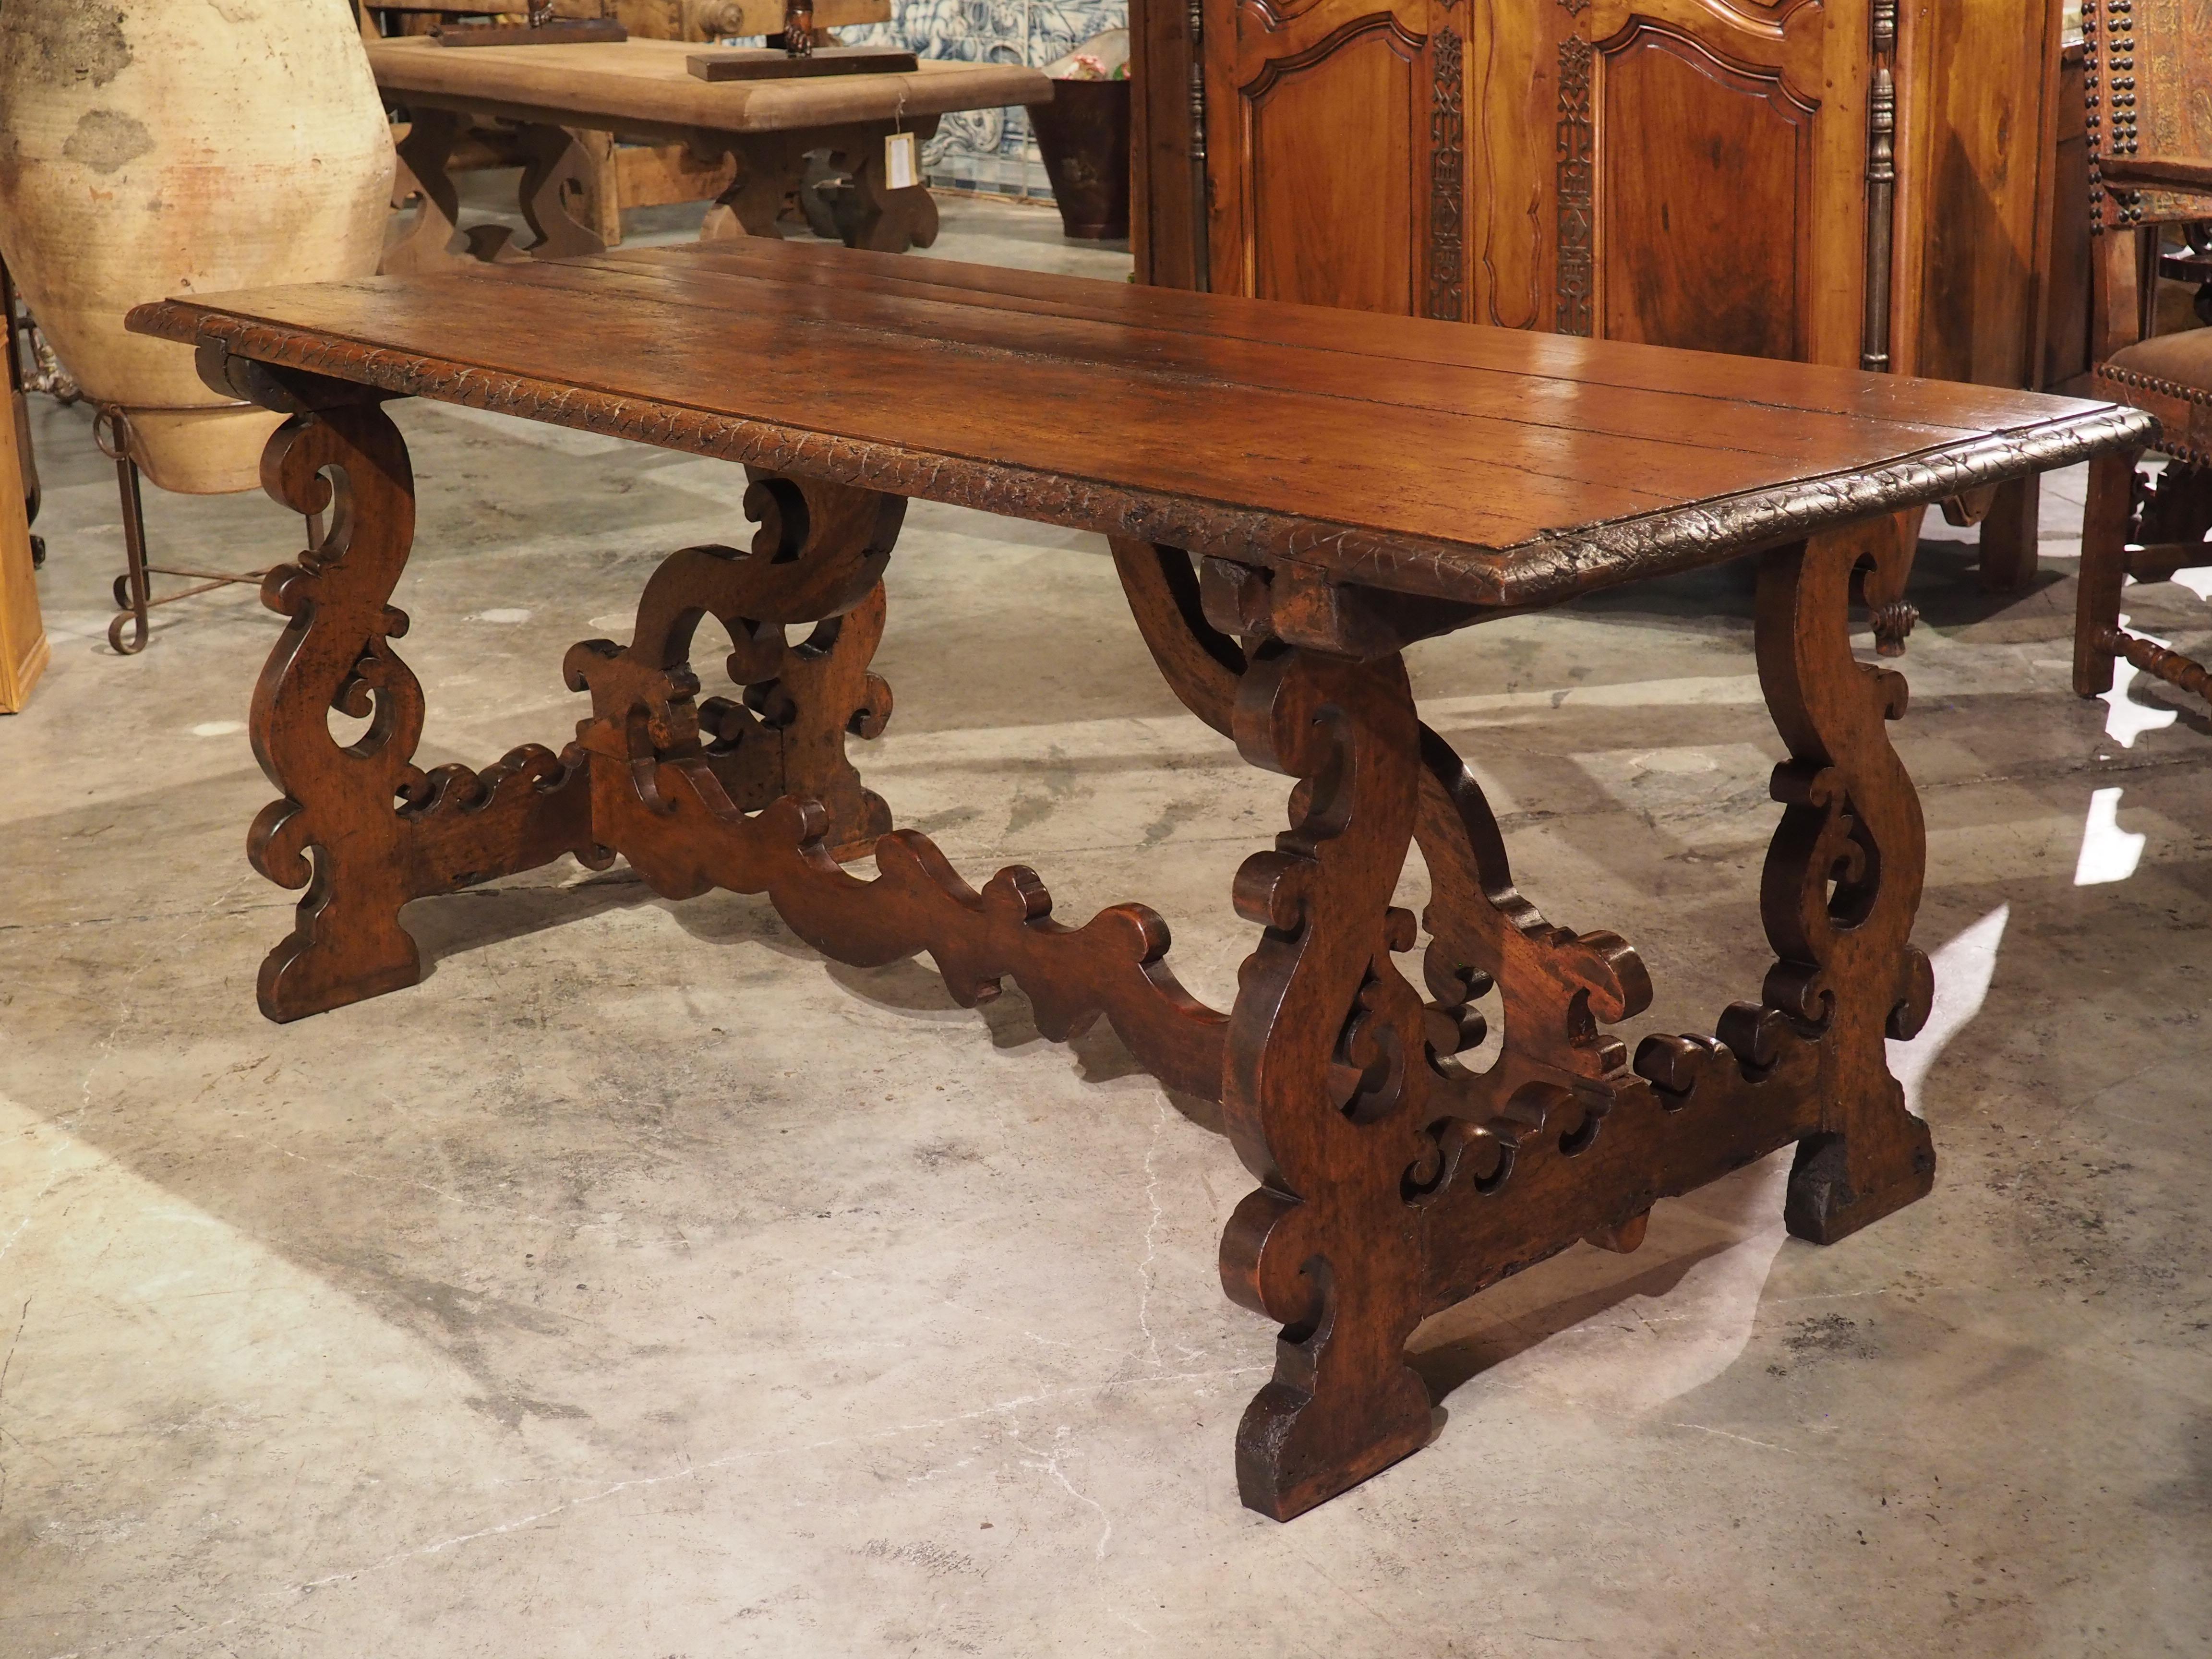 During the 1600’s, there was a strong Spanish influence on furnishings throughout Italy. Pieces such as this walnut wood table are an Italian take on the Medieval Catalan models that featured removeable iron stretchers. However, the highly worked